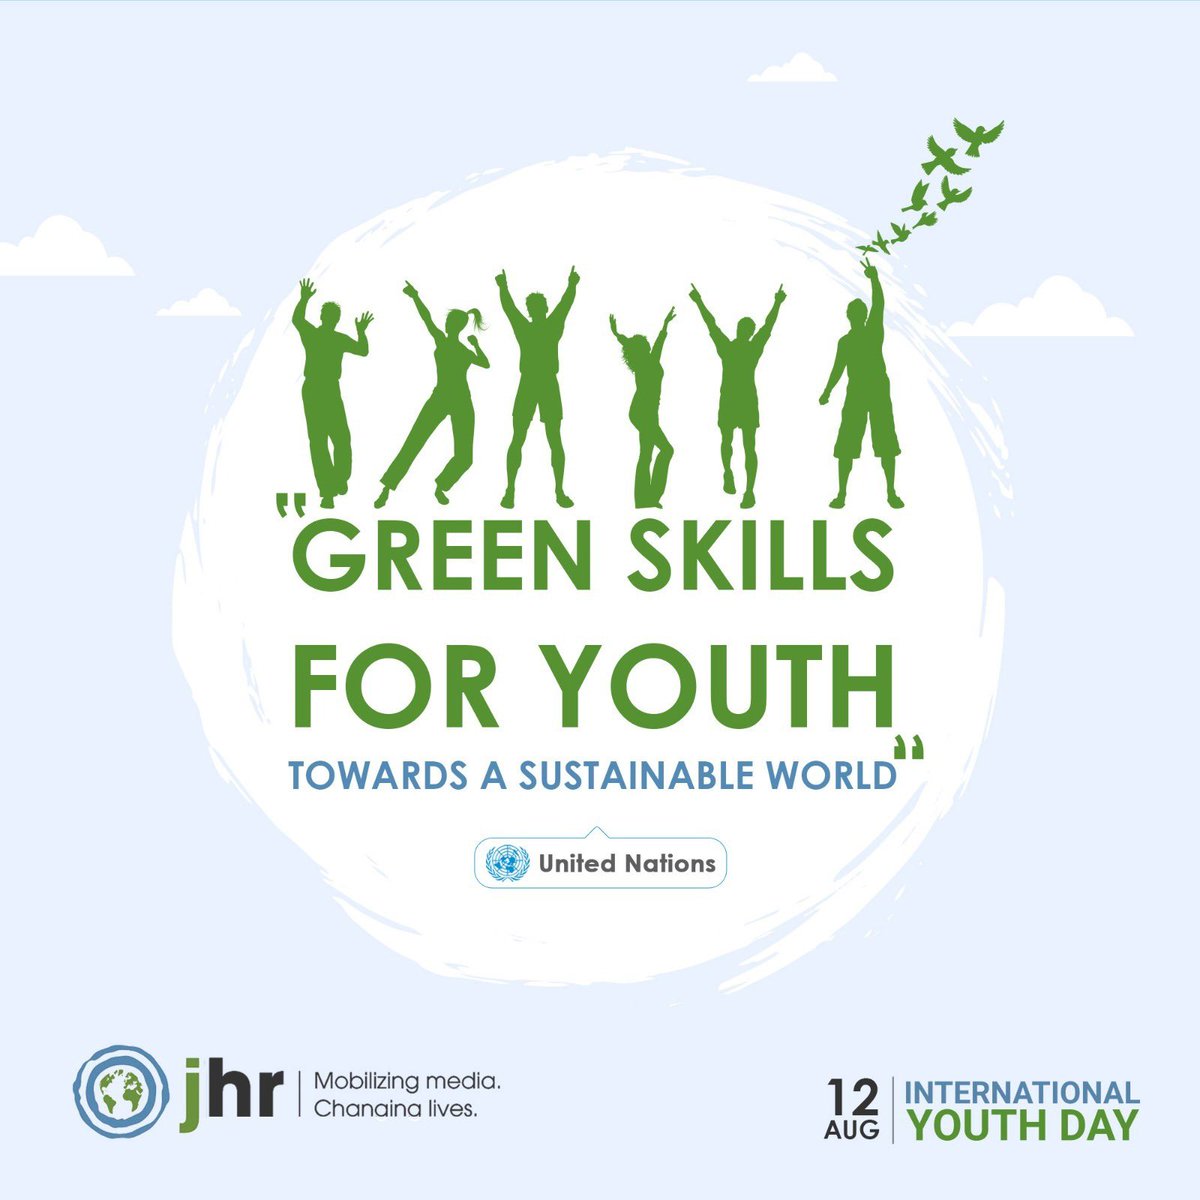 Green skills for youth towards a sustainable world.(UN)
#internationalyouthday #sustainableworld💚 #jhr #youth #environment #greenskills